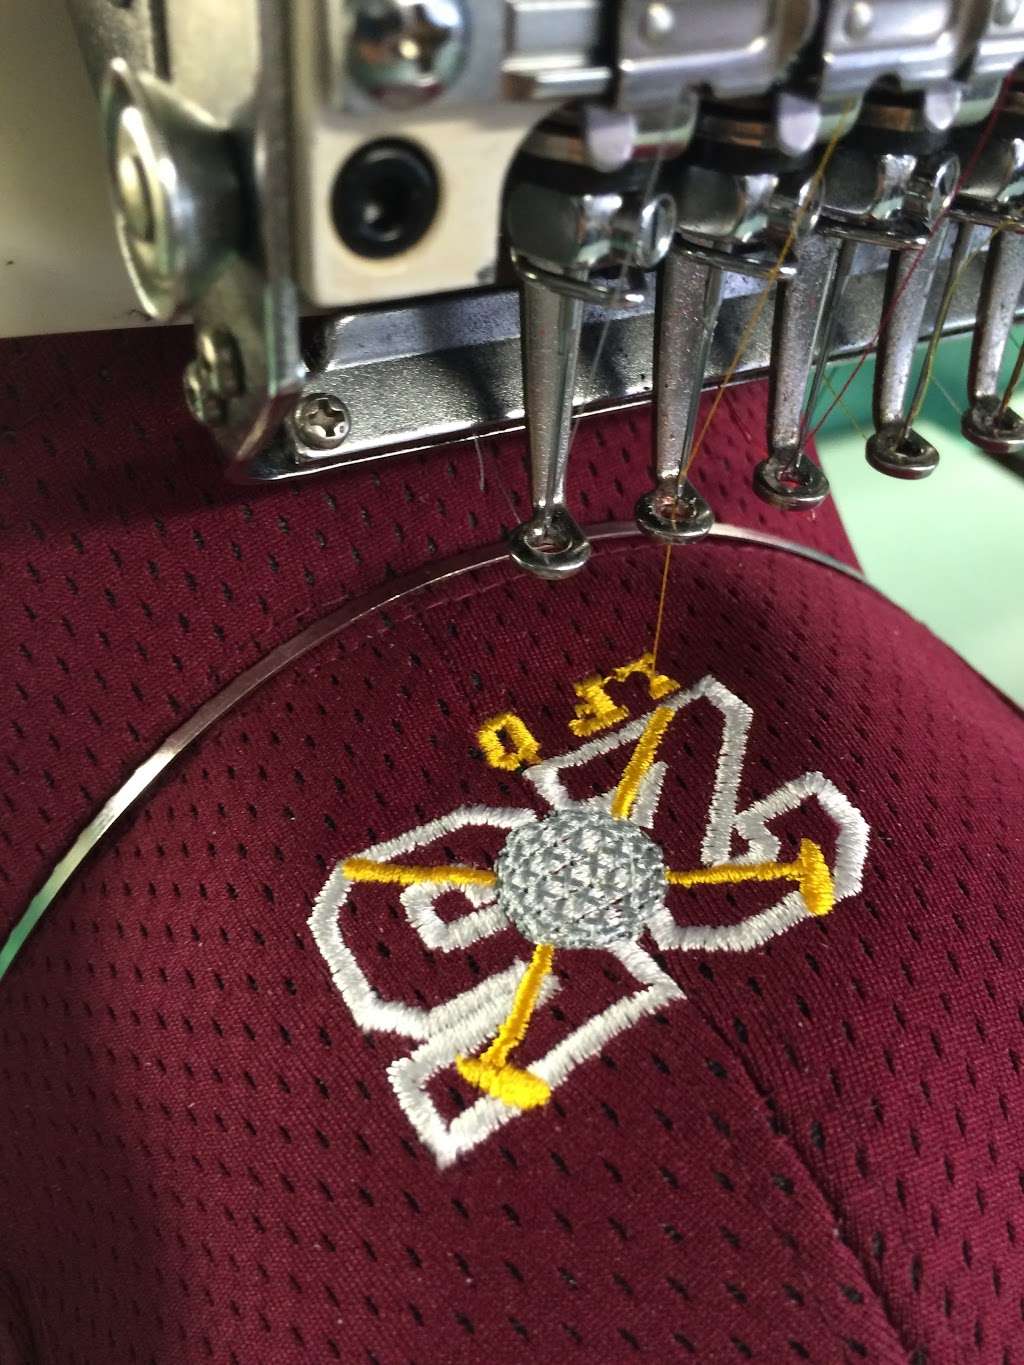 V-One Embroidery & Screen Printing | 246 Stadden Rd #101, Tannersville, PA 18372 | Phone: (570) 664-2700